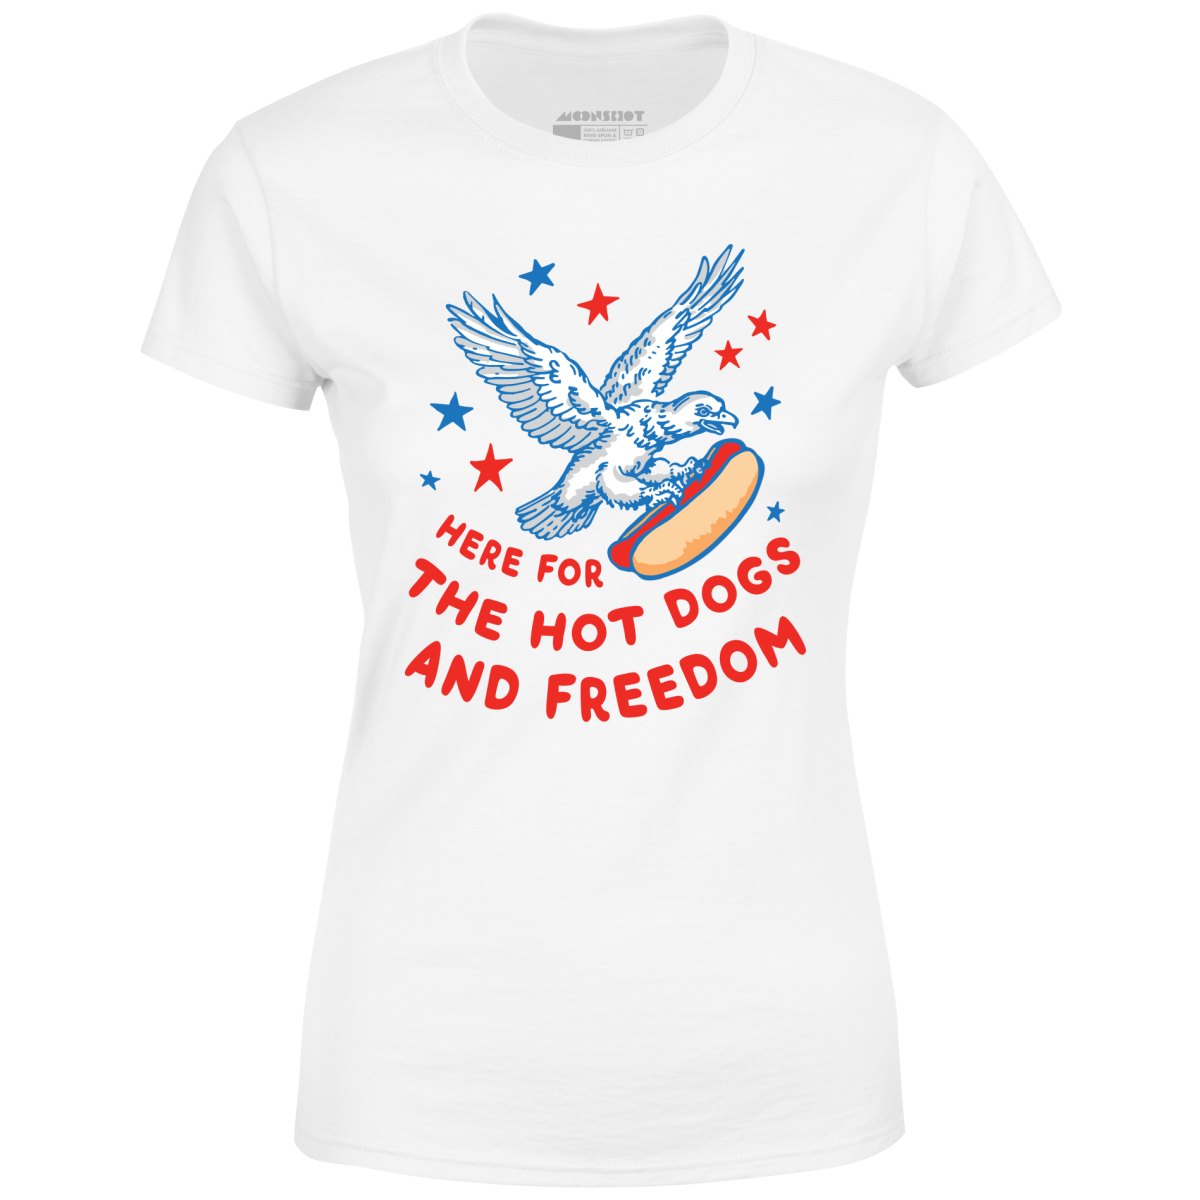 Here For The Hot Dogs and Freedom - Women's T-Shirt